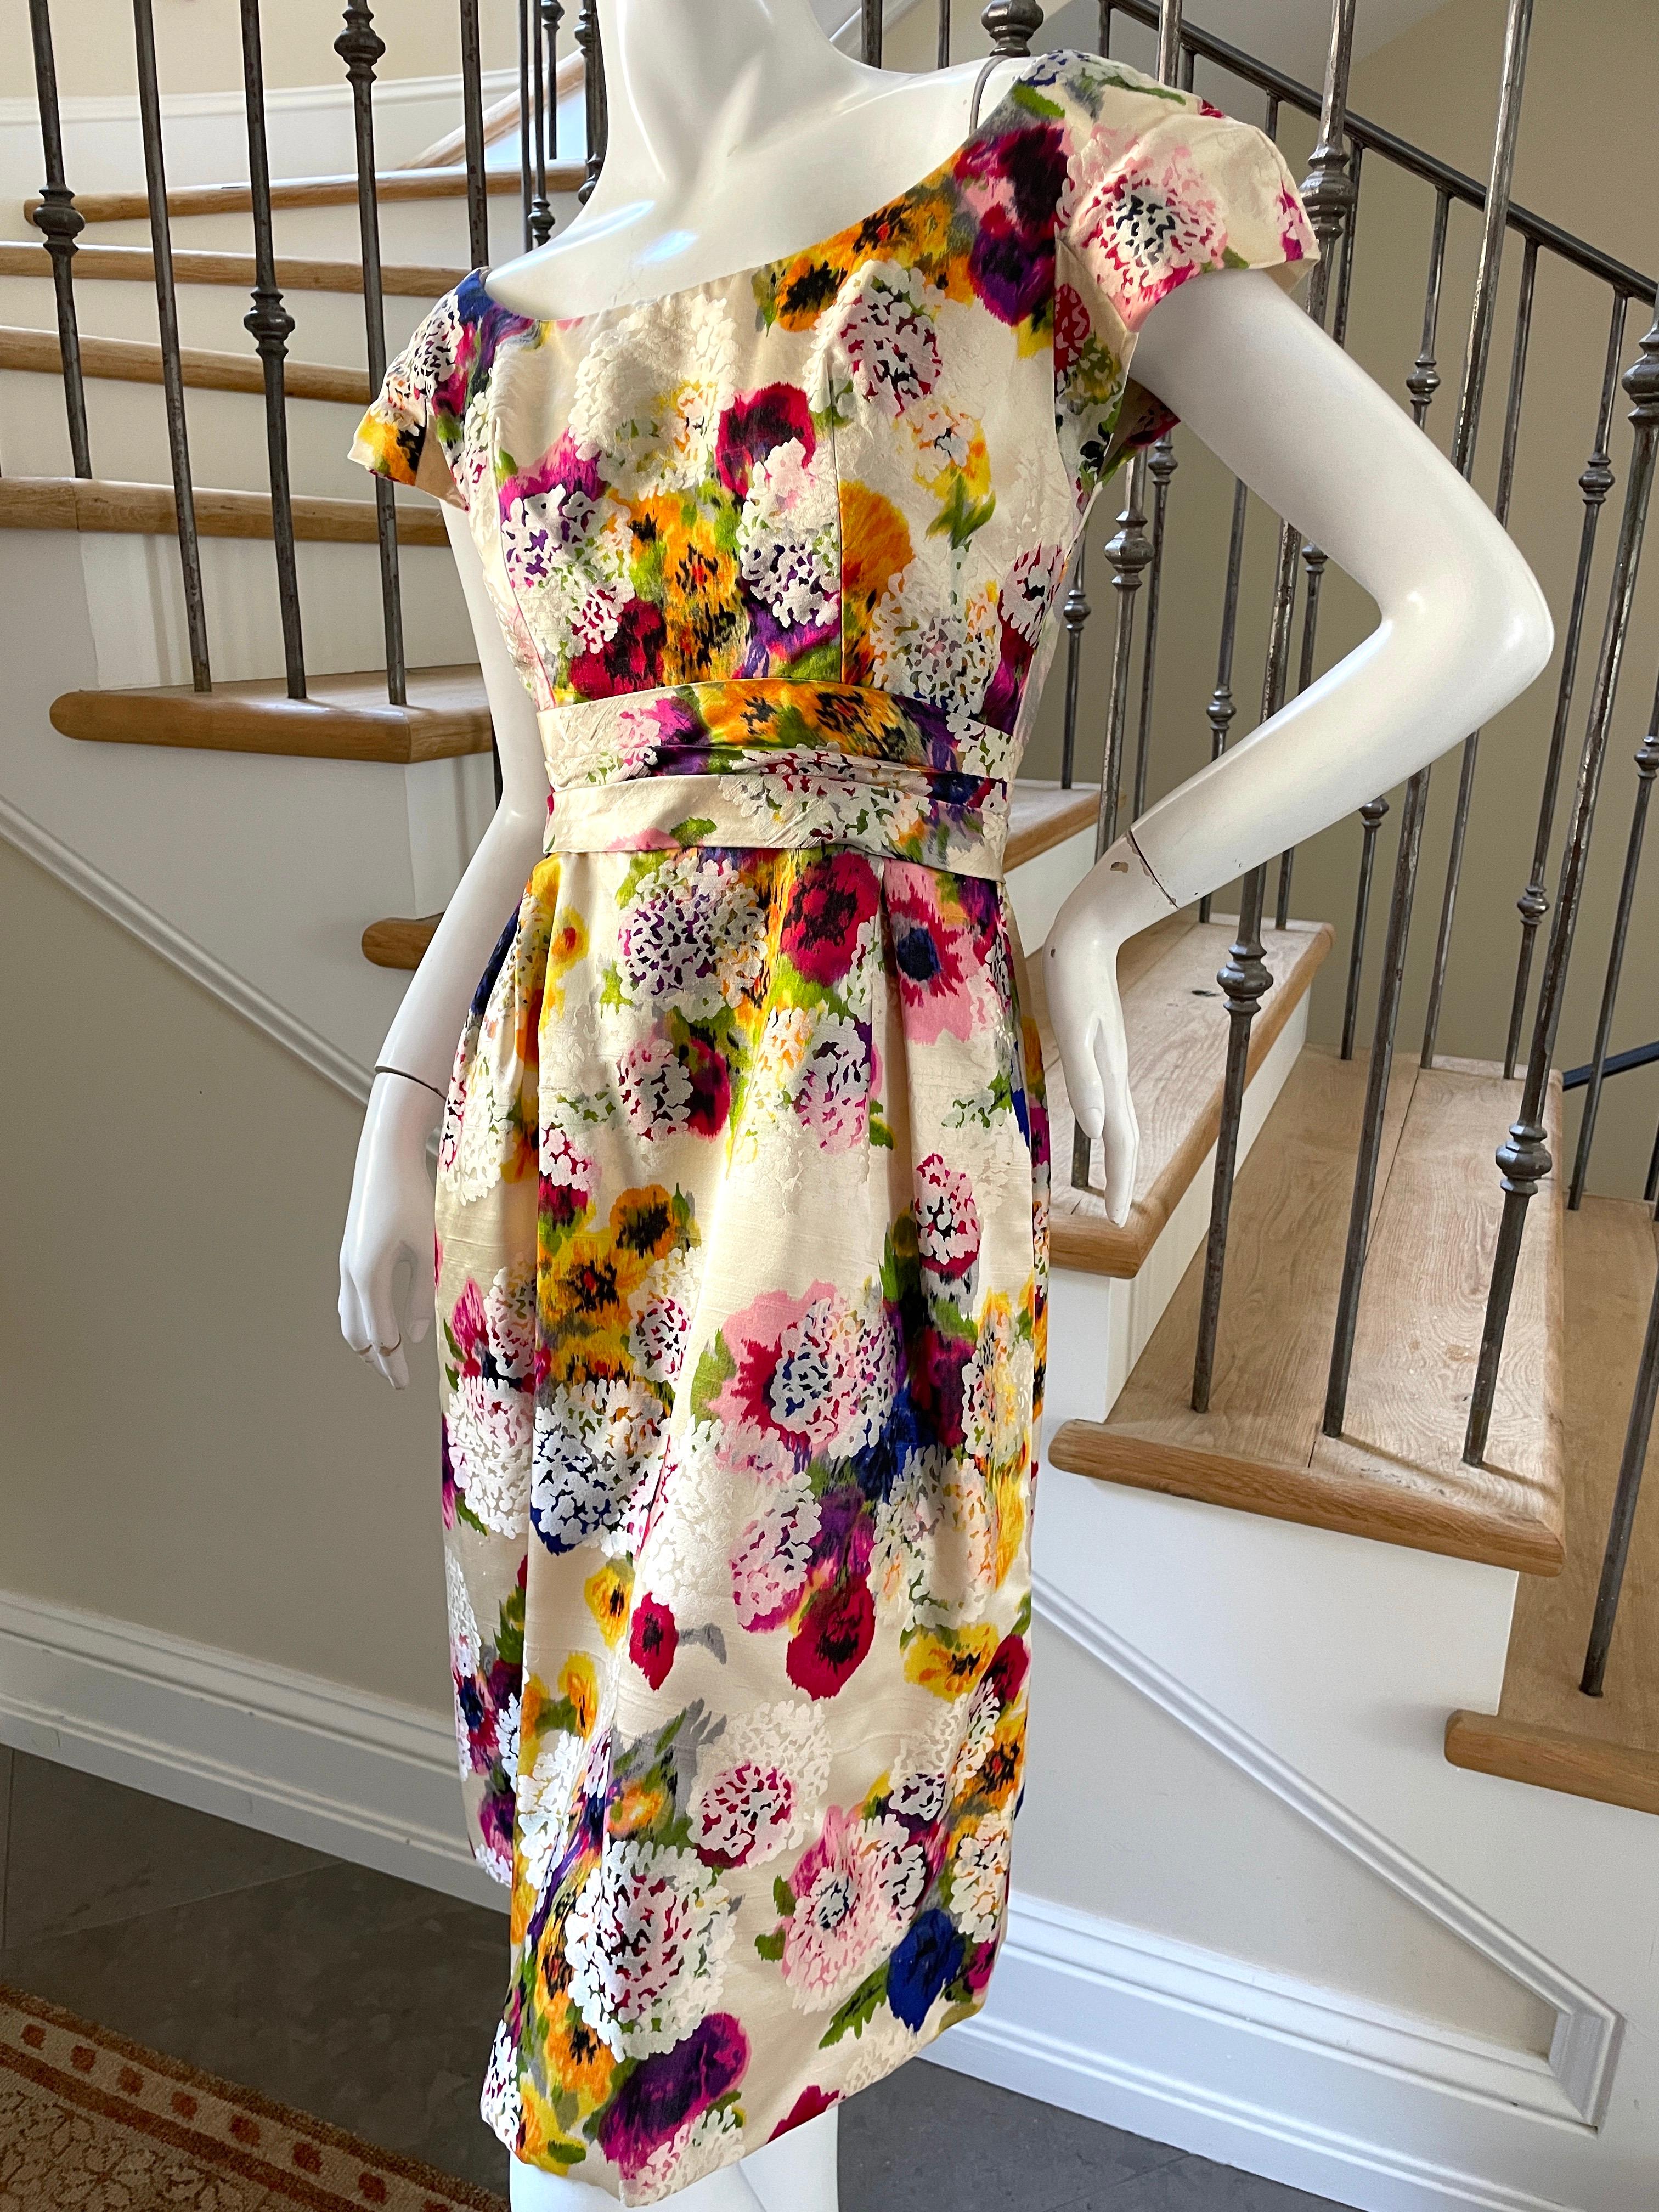 Mollie Parnis for Saks Fifth Avenue 1960's Floral Silk Dress. 
So pretty.
Bust 35